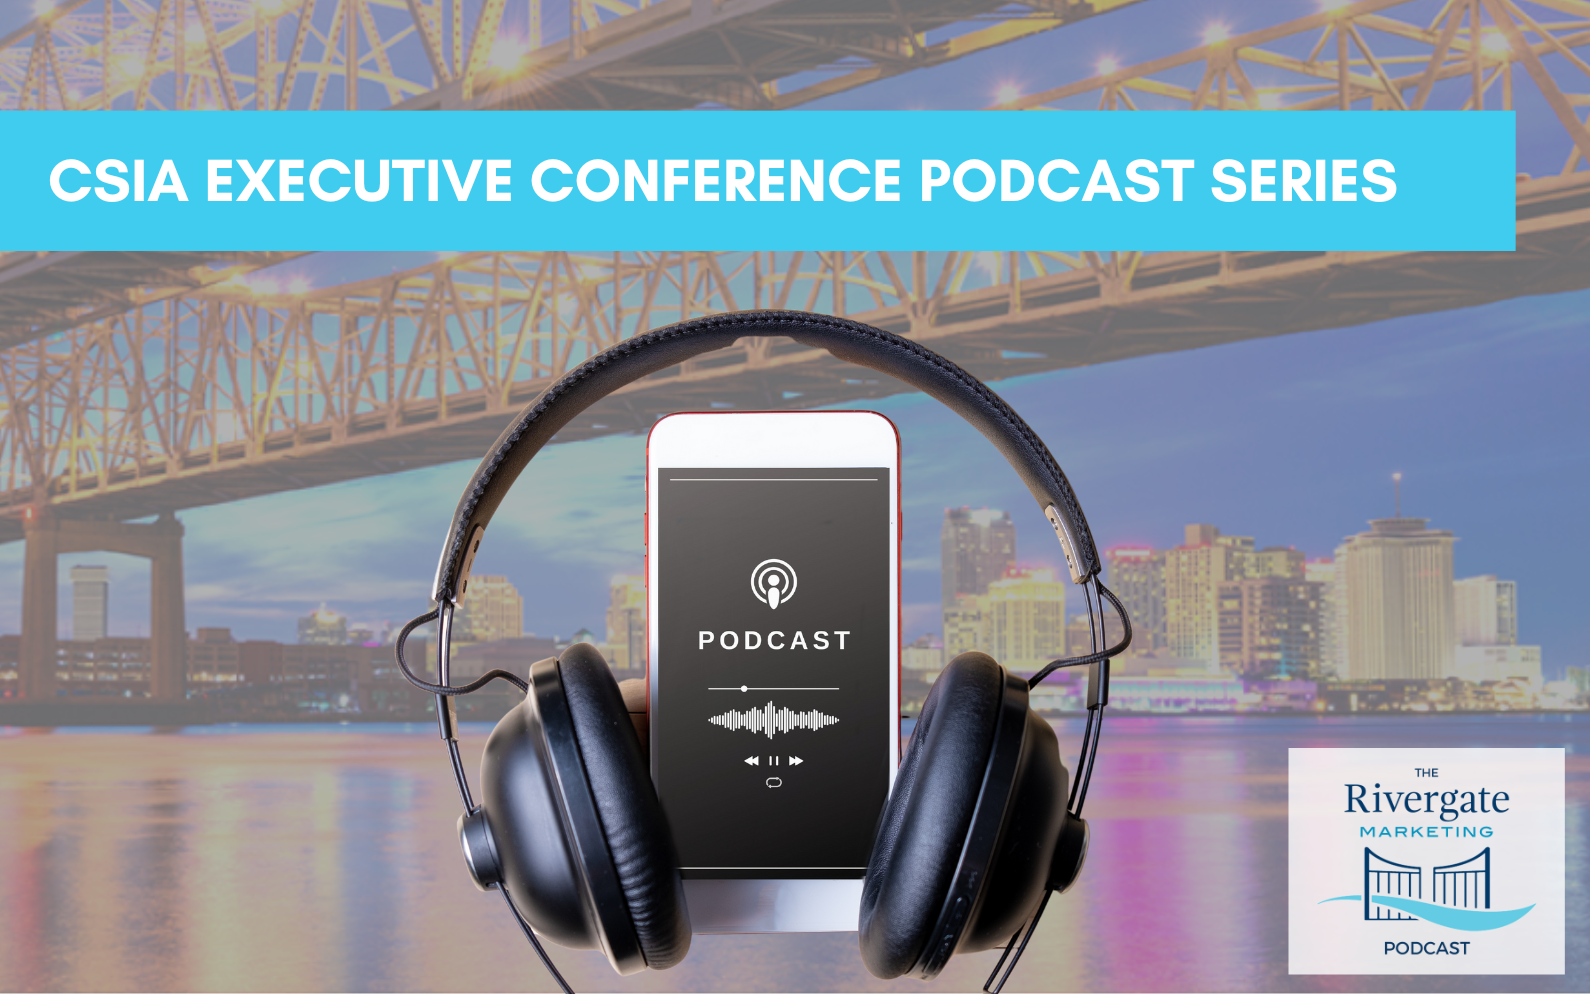 Rivergate Marketing podcast 2023 CSIA Executive Conference Series: Evolving System Integration & Marketing Strategies with Jose Rivera, Don Roberts, and Peter Moskal